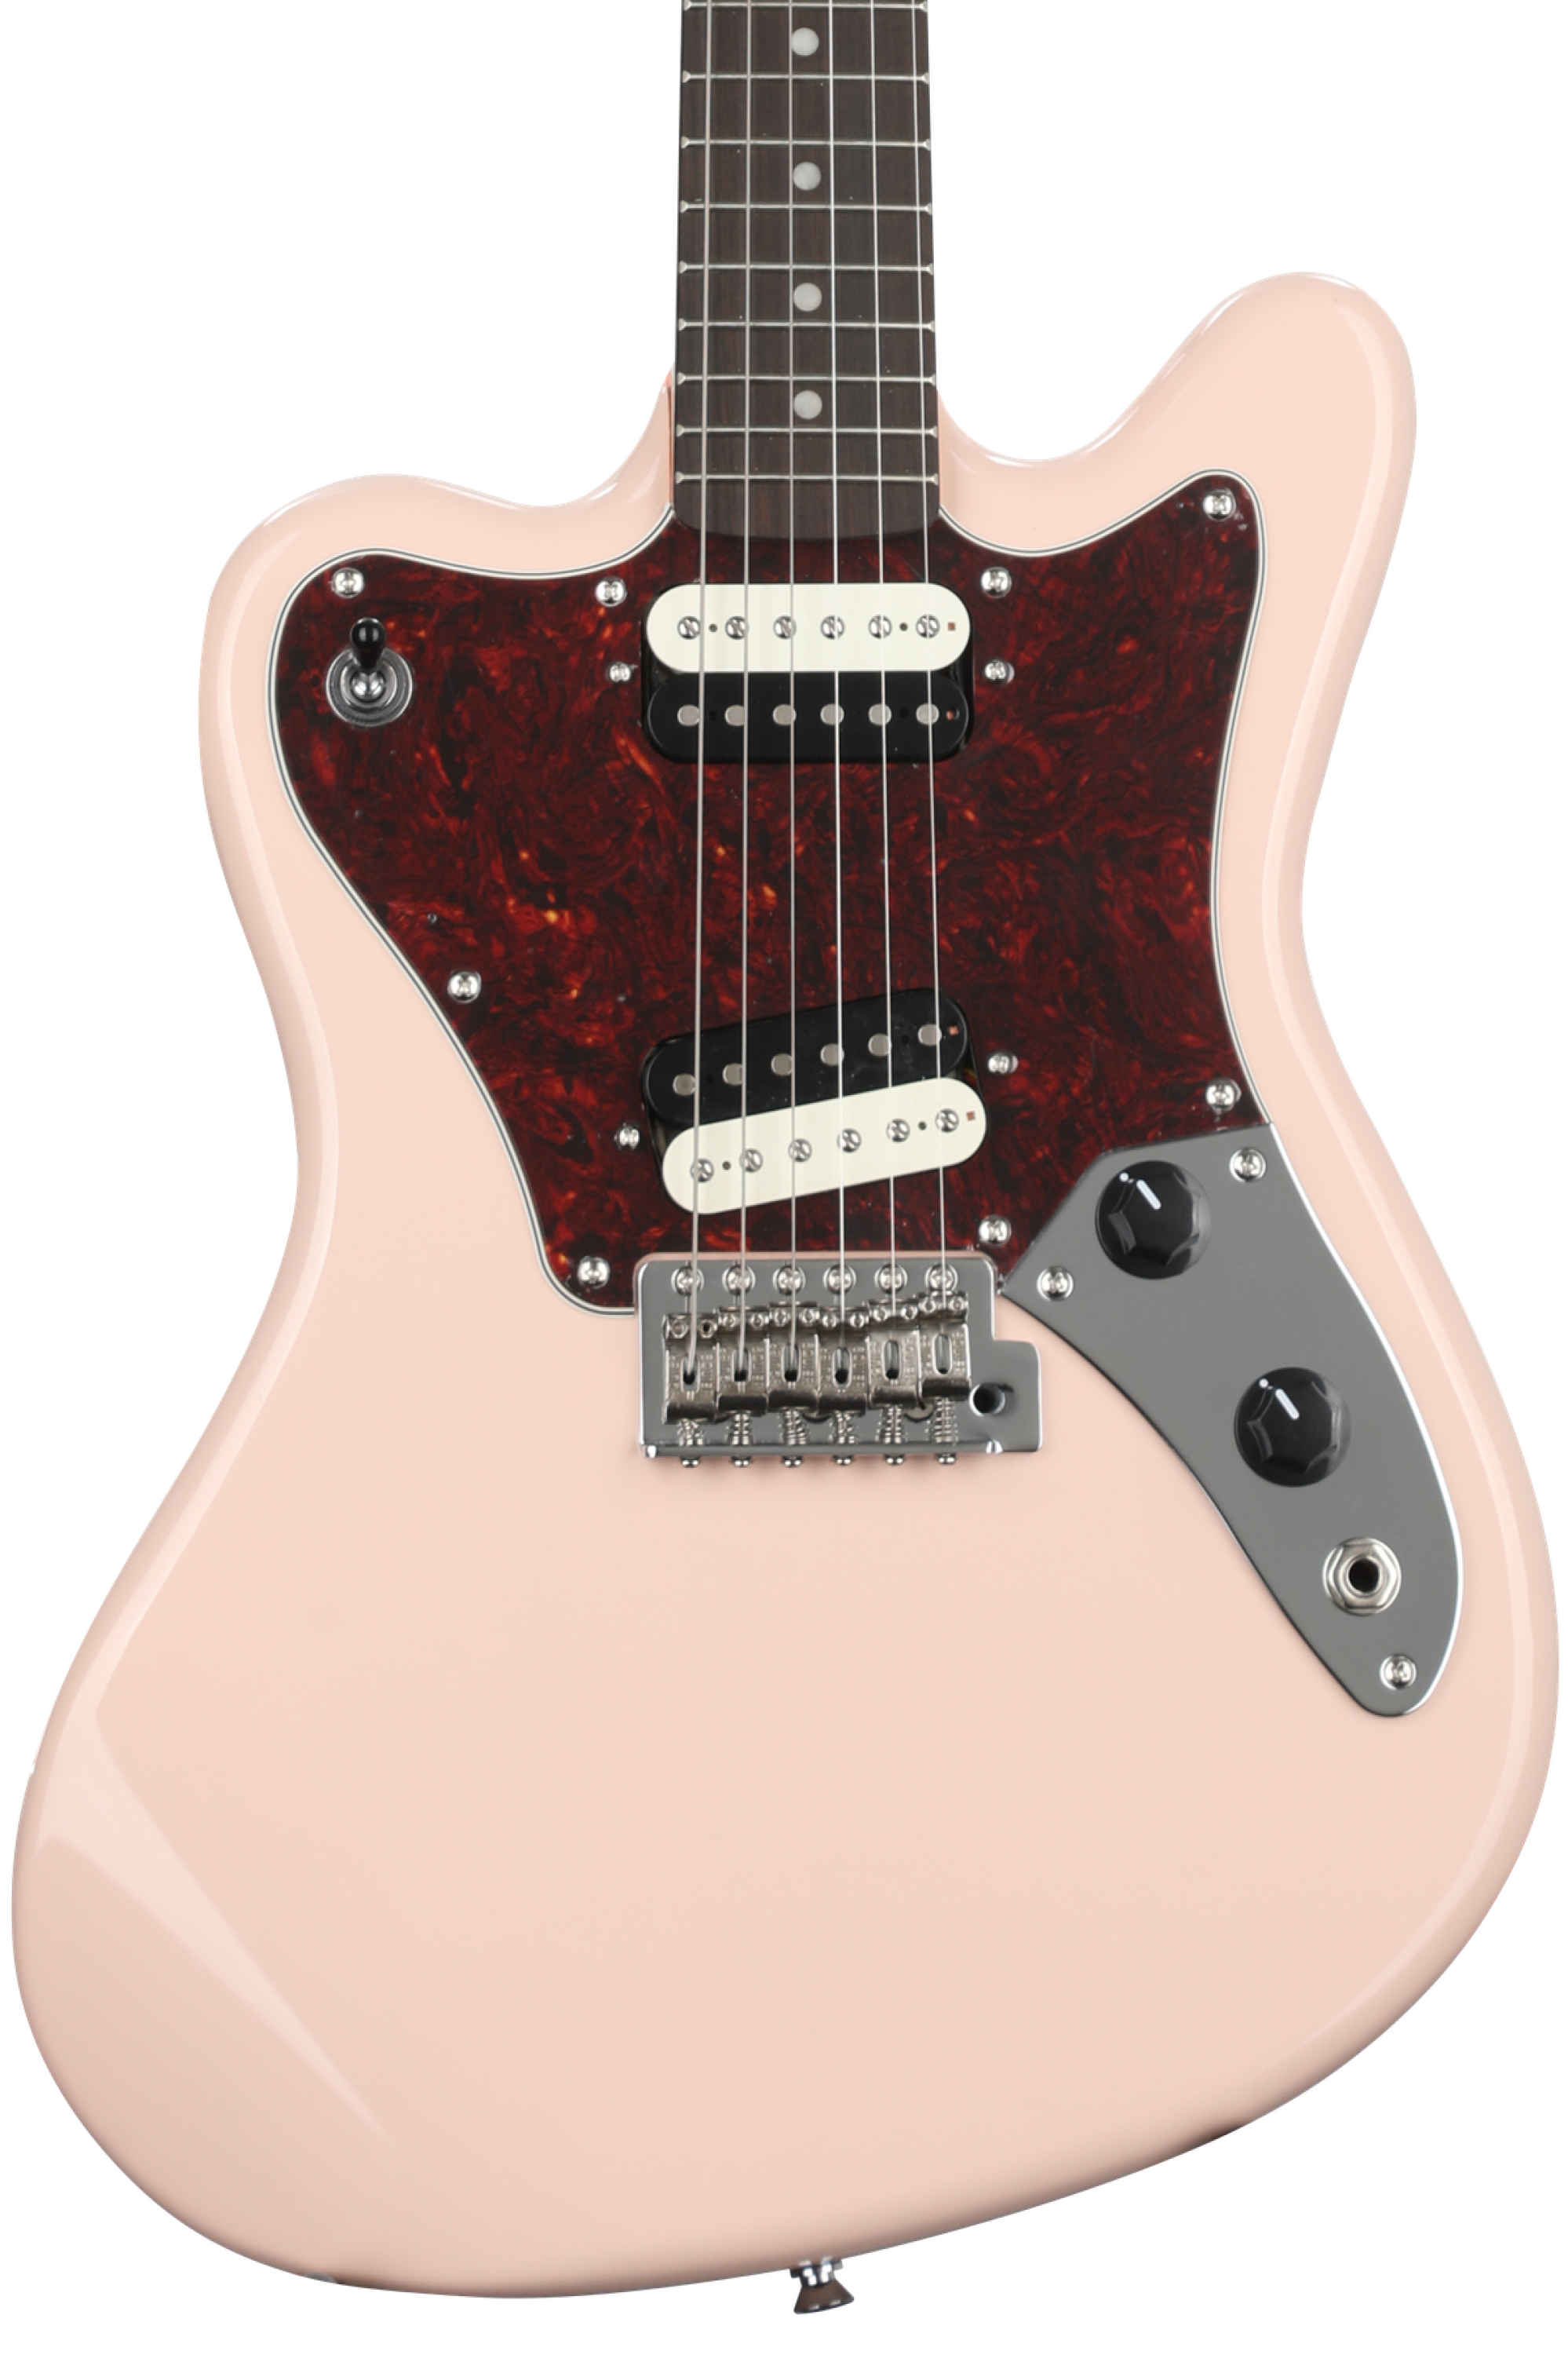 Squier Paranormal Super-Sonic Electric Guitar - Shell Pink with